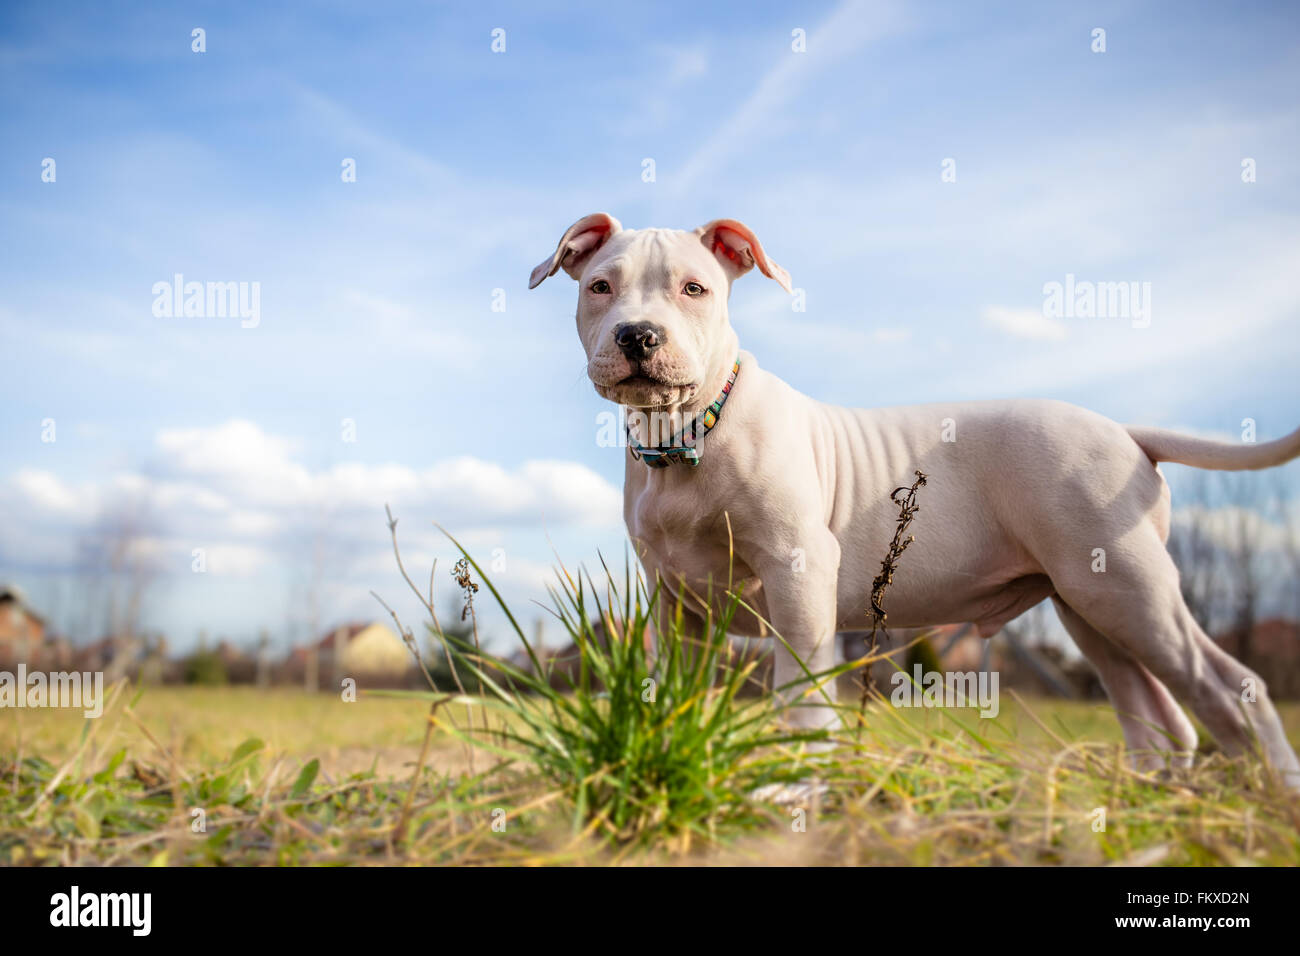 White American Staffordshire terrier puppy standing on grass Stock Photo